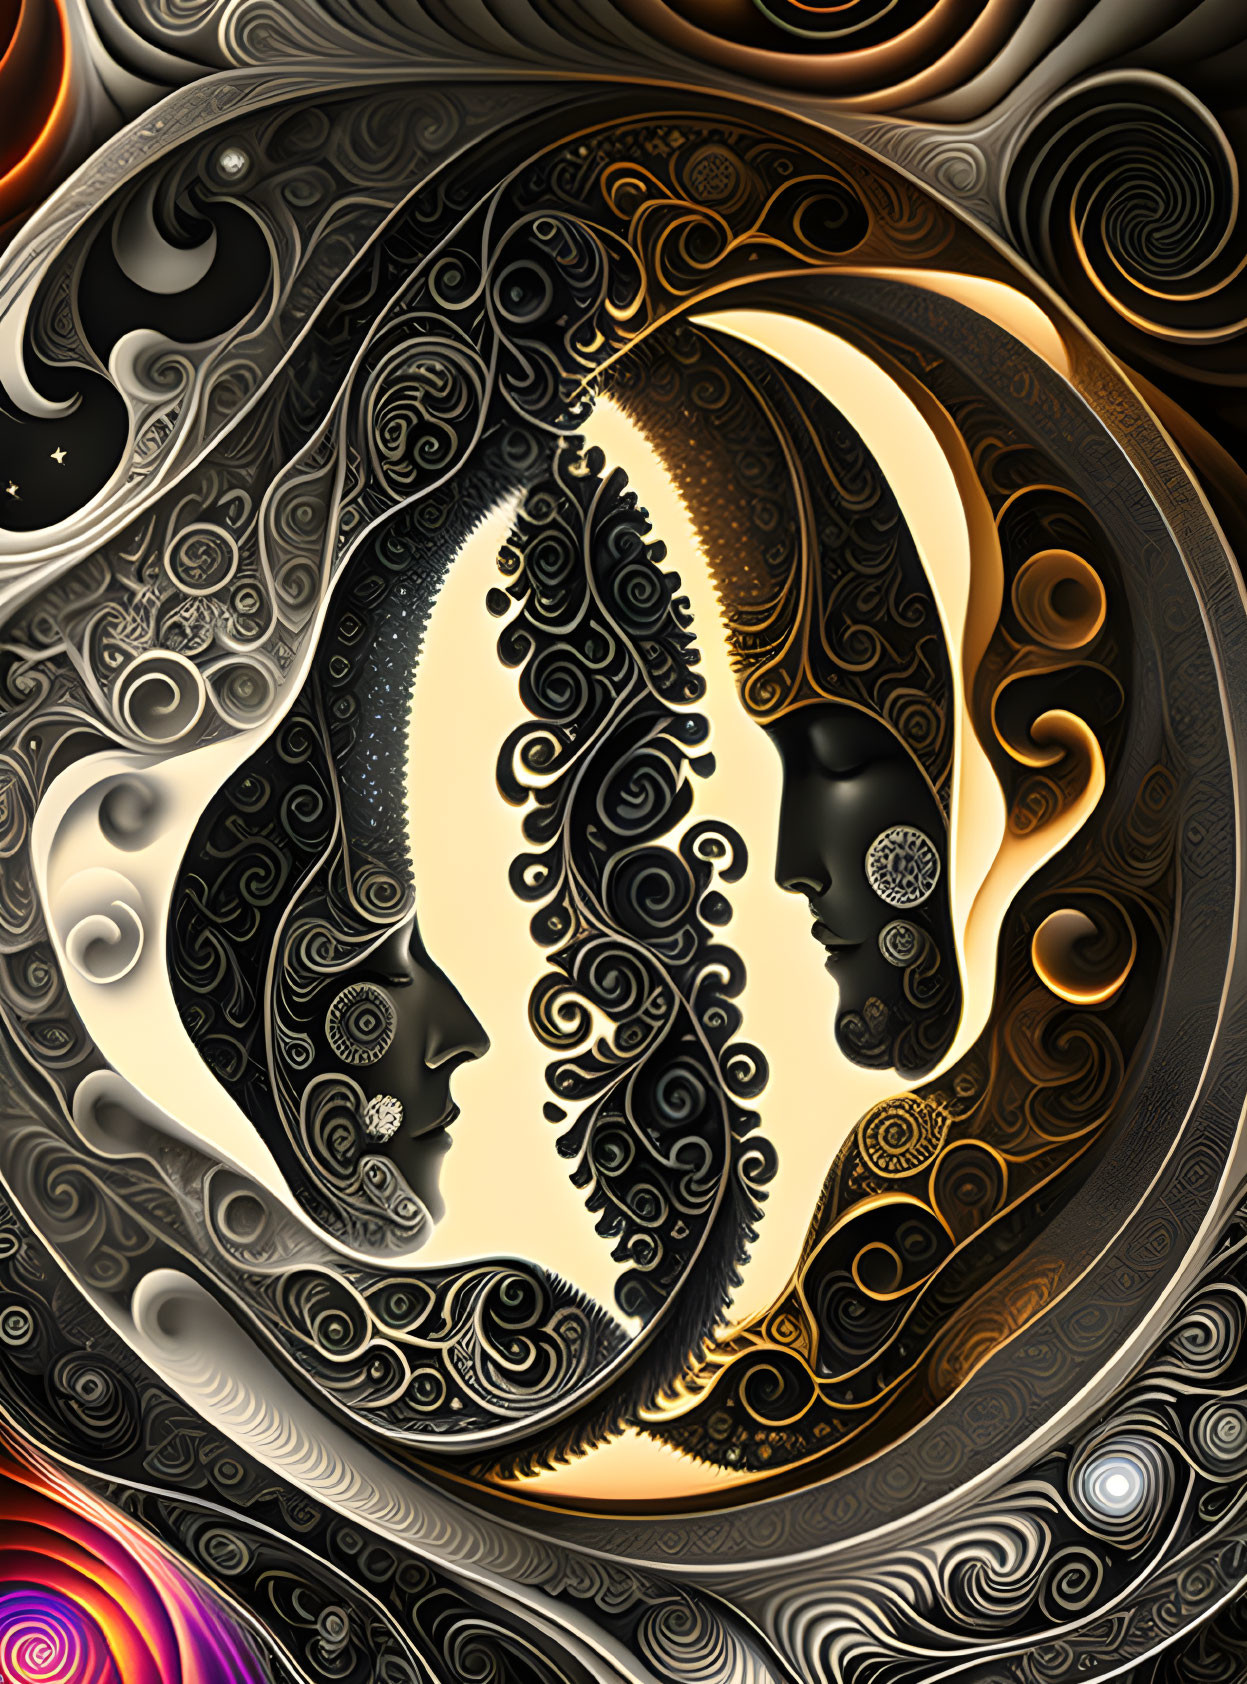 Symmetrical digital art of stylized faces in gold, black, and white swirls